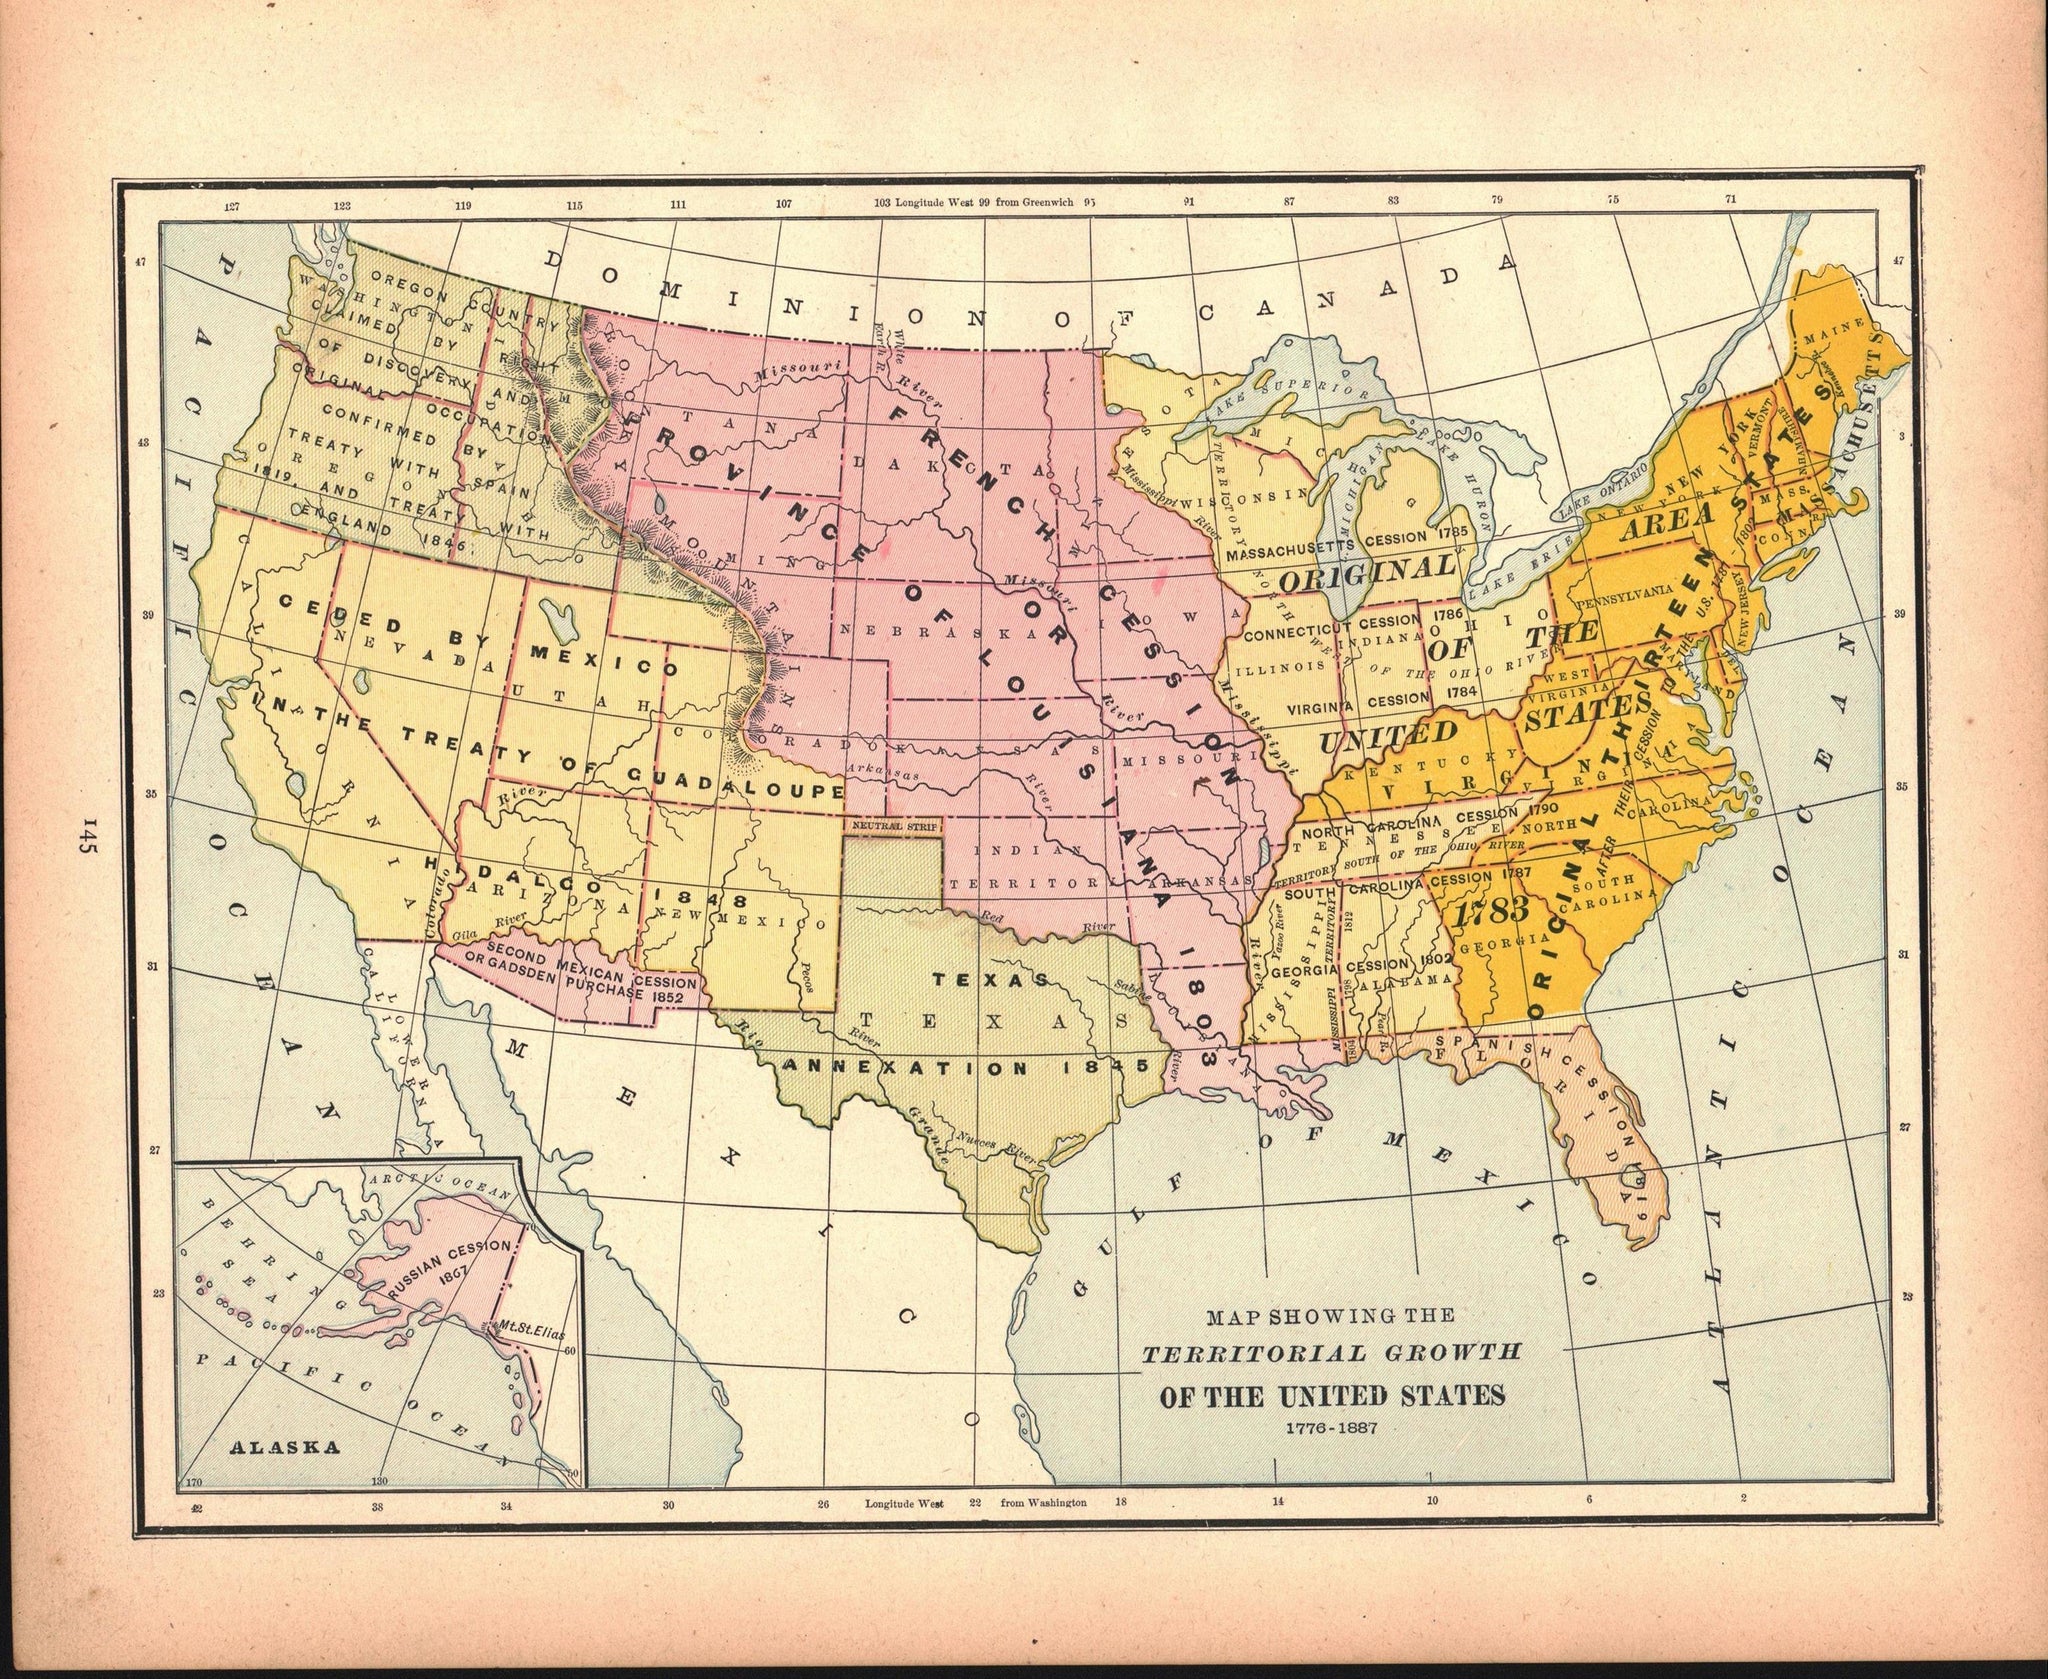 1887 Territorial Growth of the United States - Cram - Historic Accents